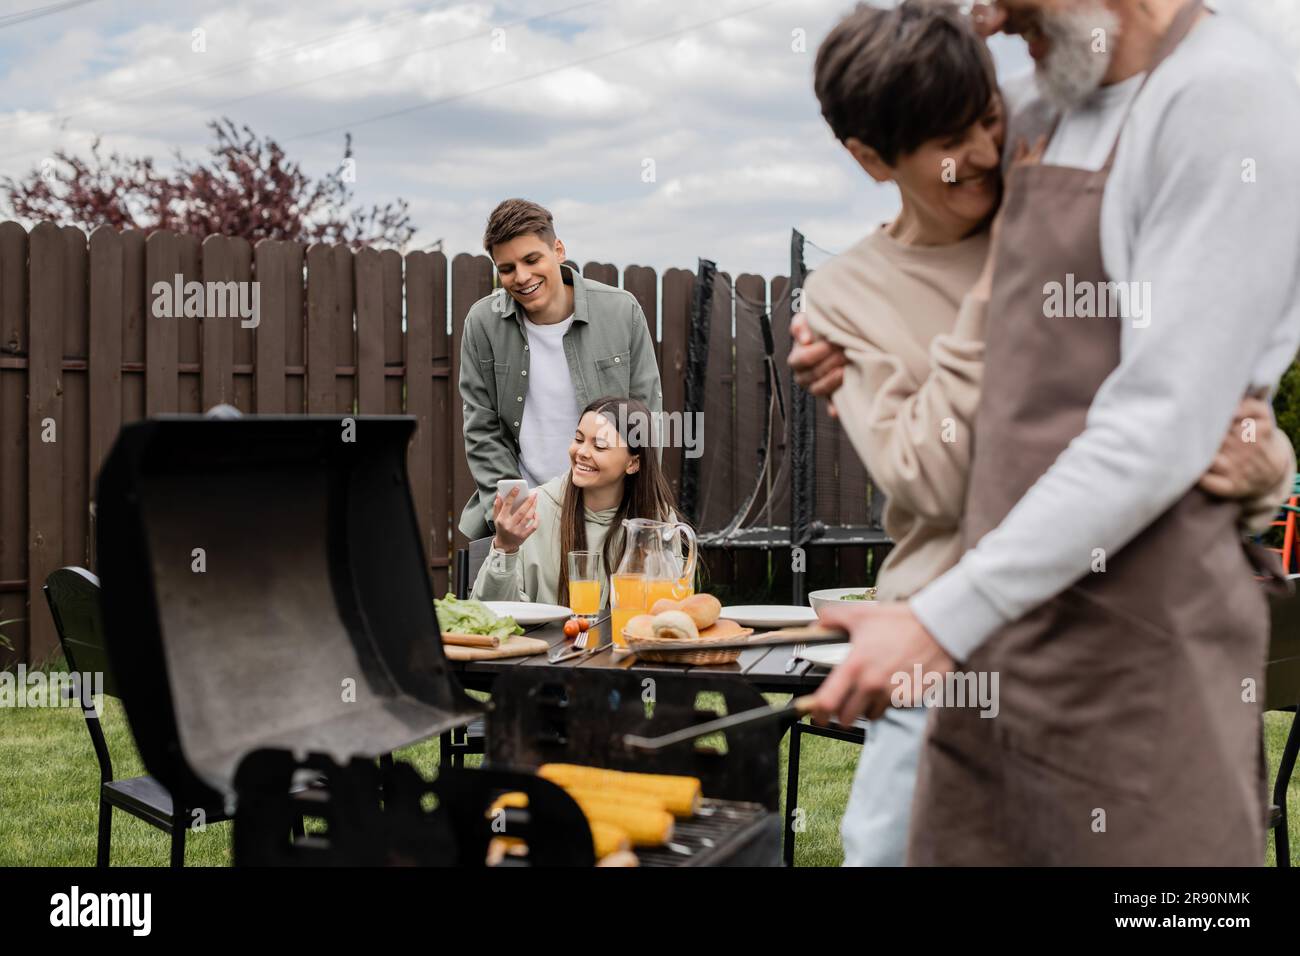 happy teenage girl showing something on smartphone to young adult brother, digital age, father preparing food on bbq grill, barbecue party, parents da Stock Photo